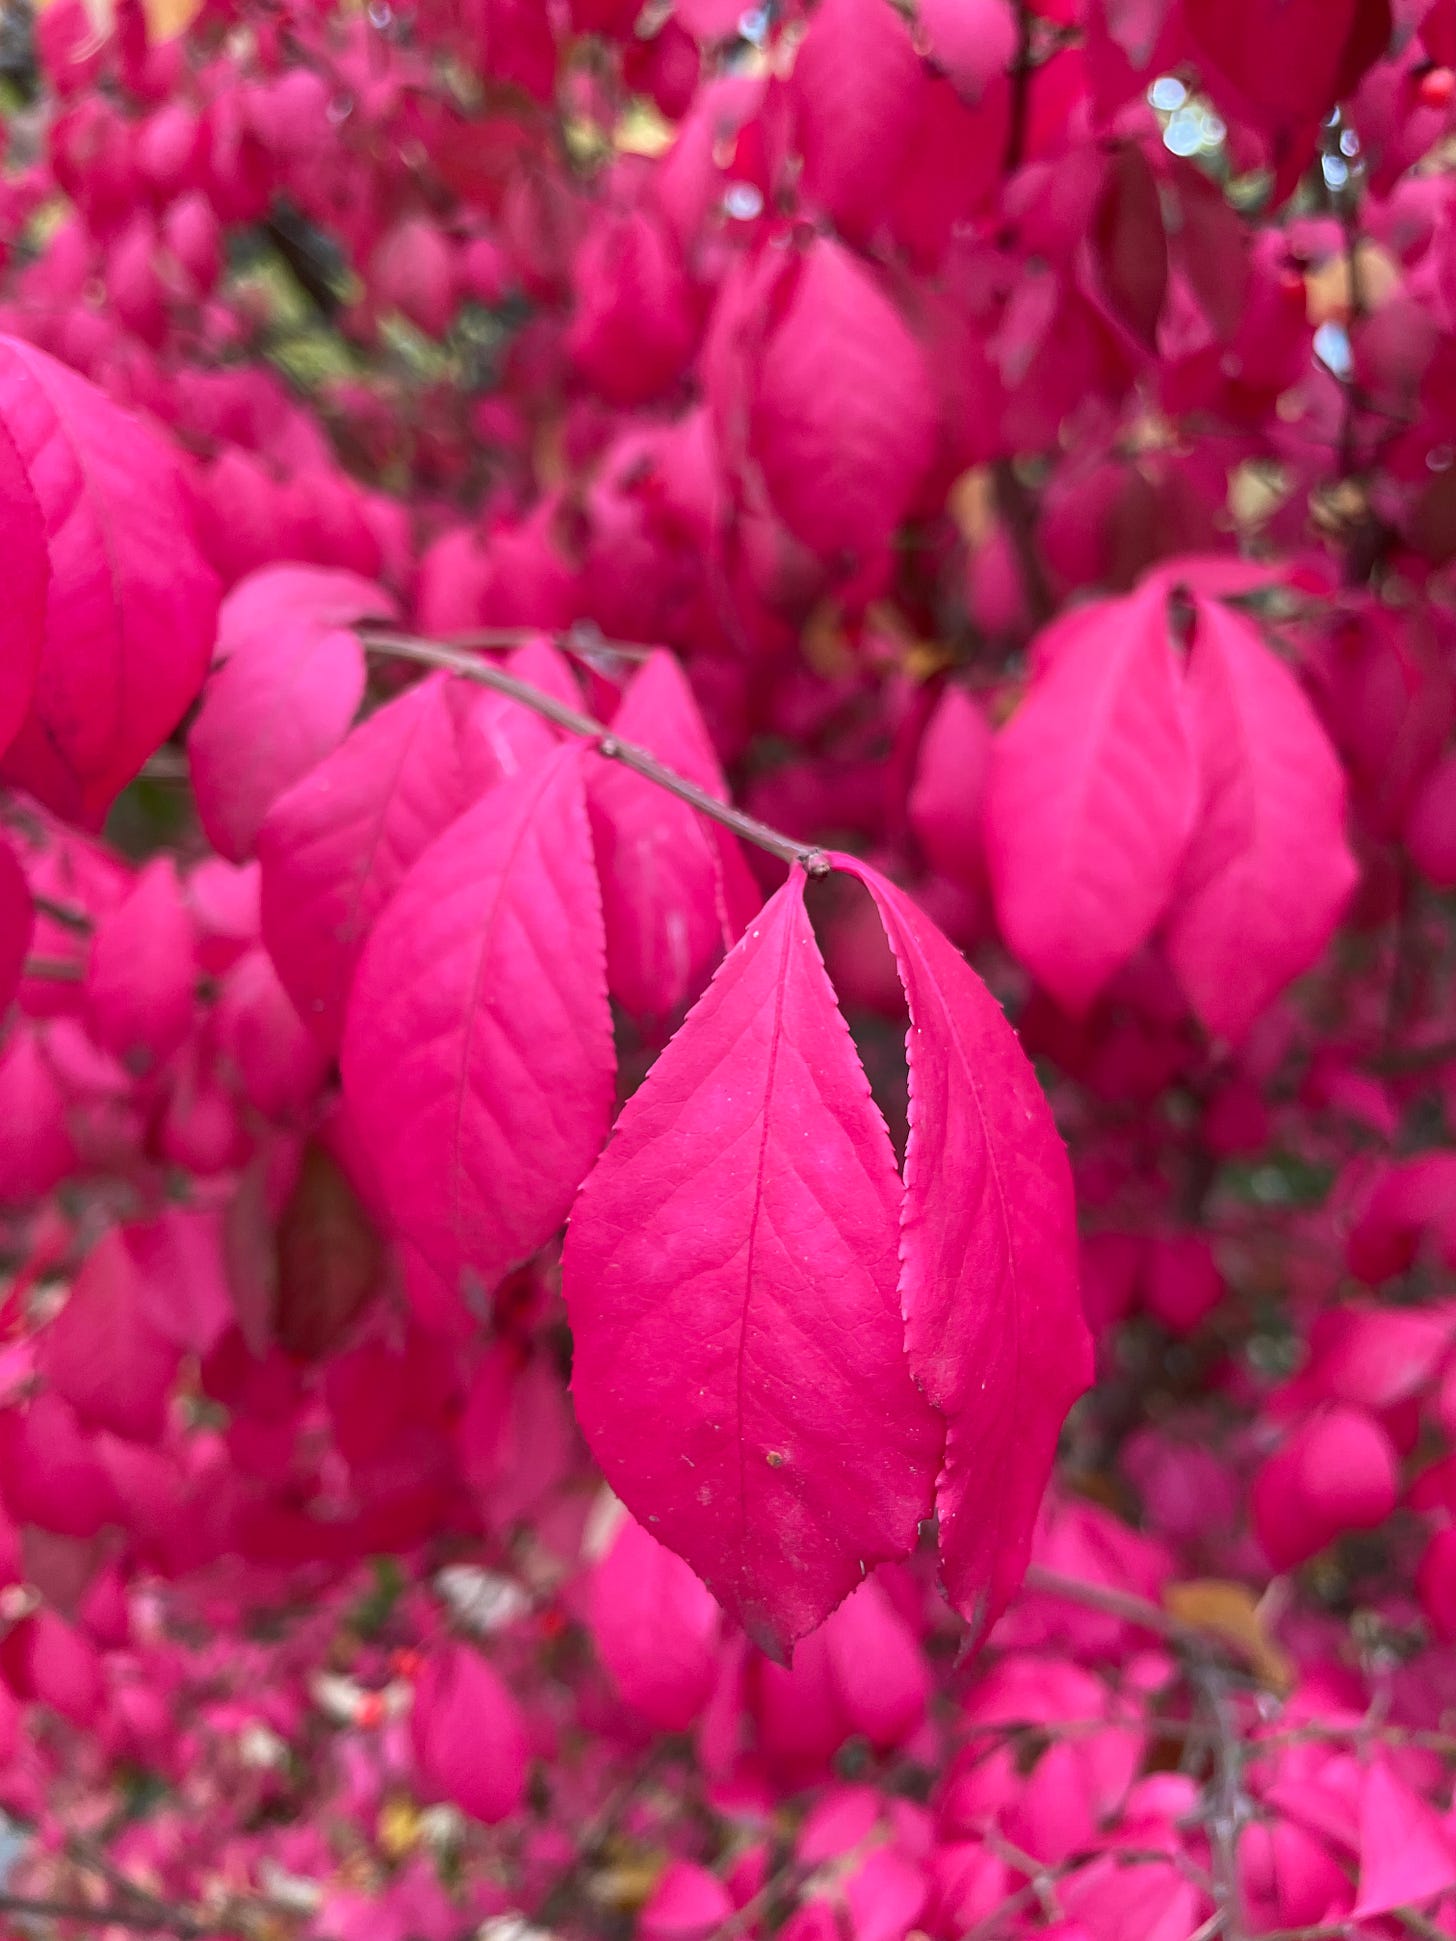 Incredibly saturated magenta pink leaves of a burning bush in Toronto in October.